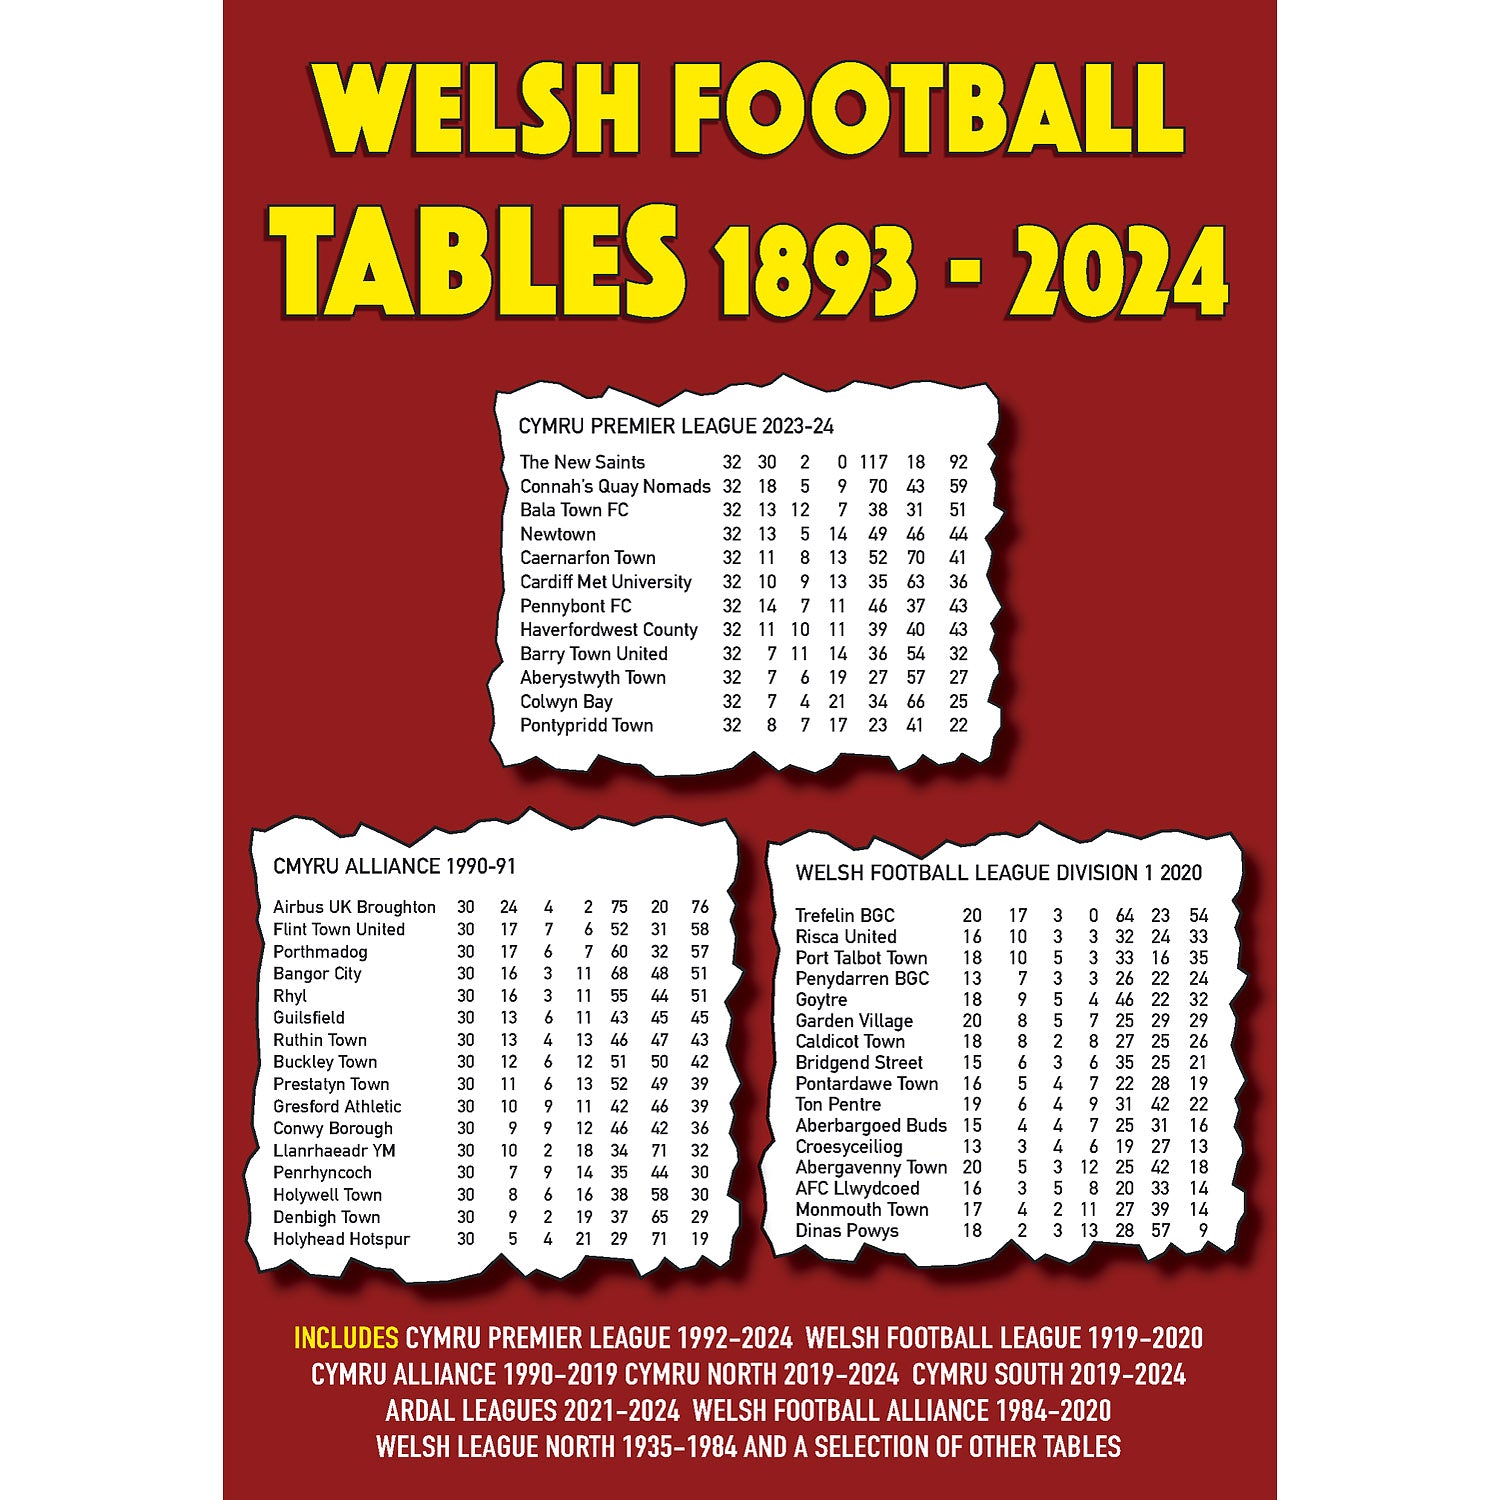 Welsh Football Tables 1893-2024